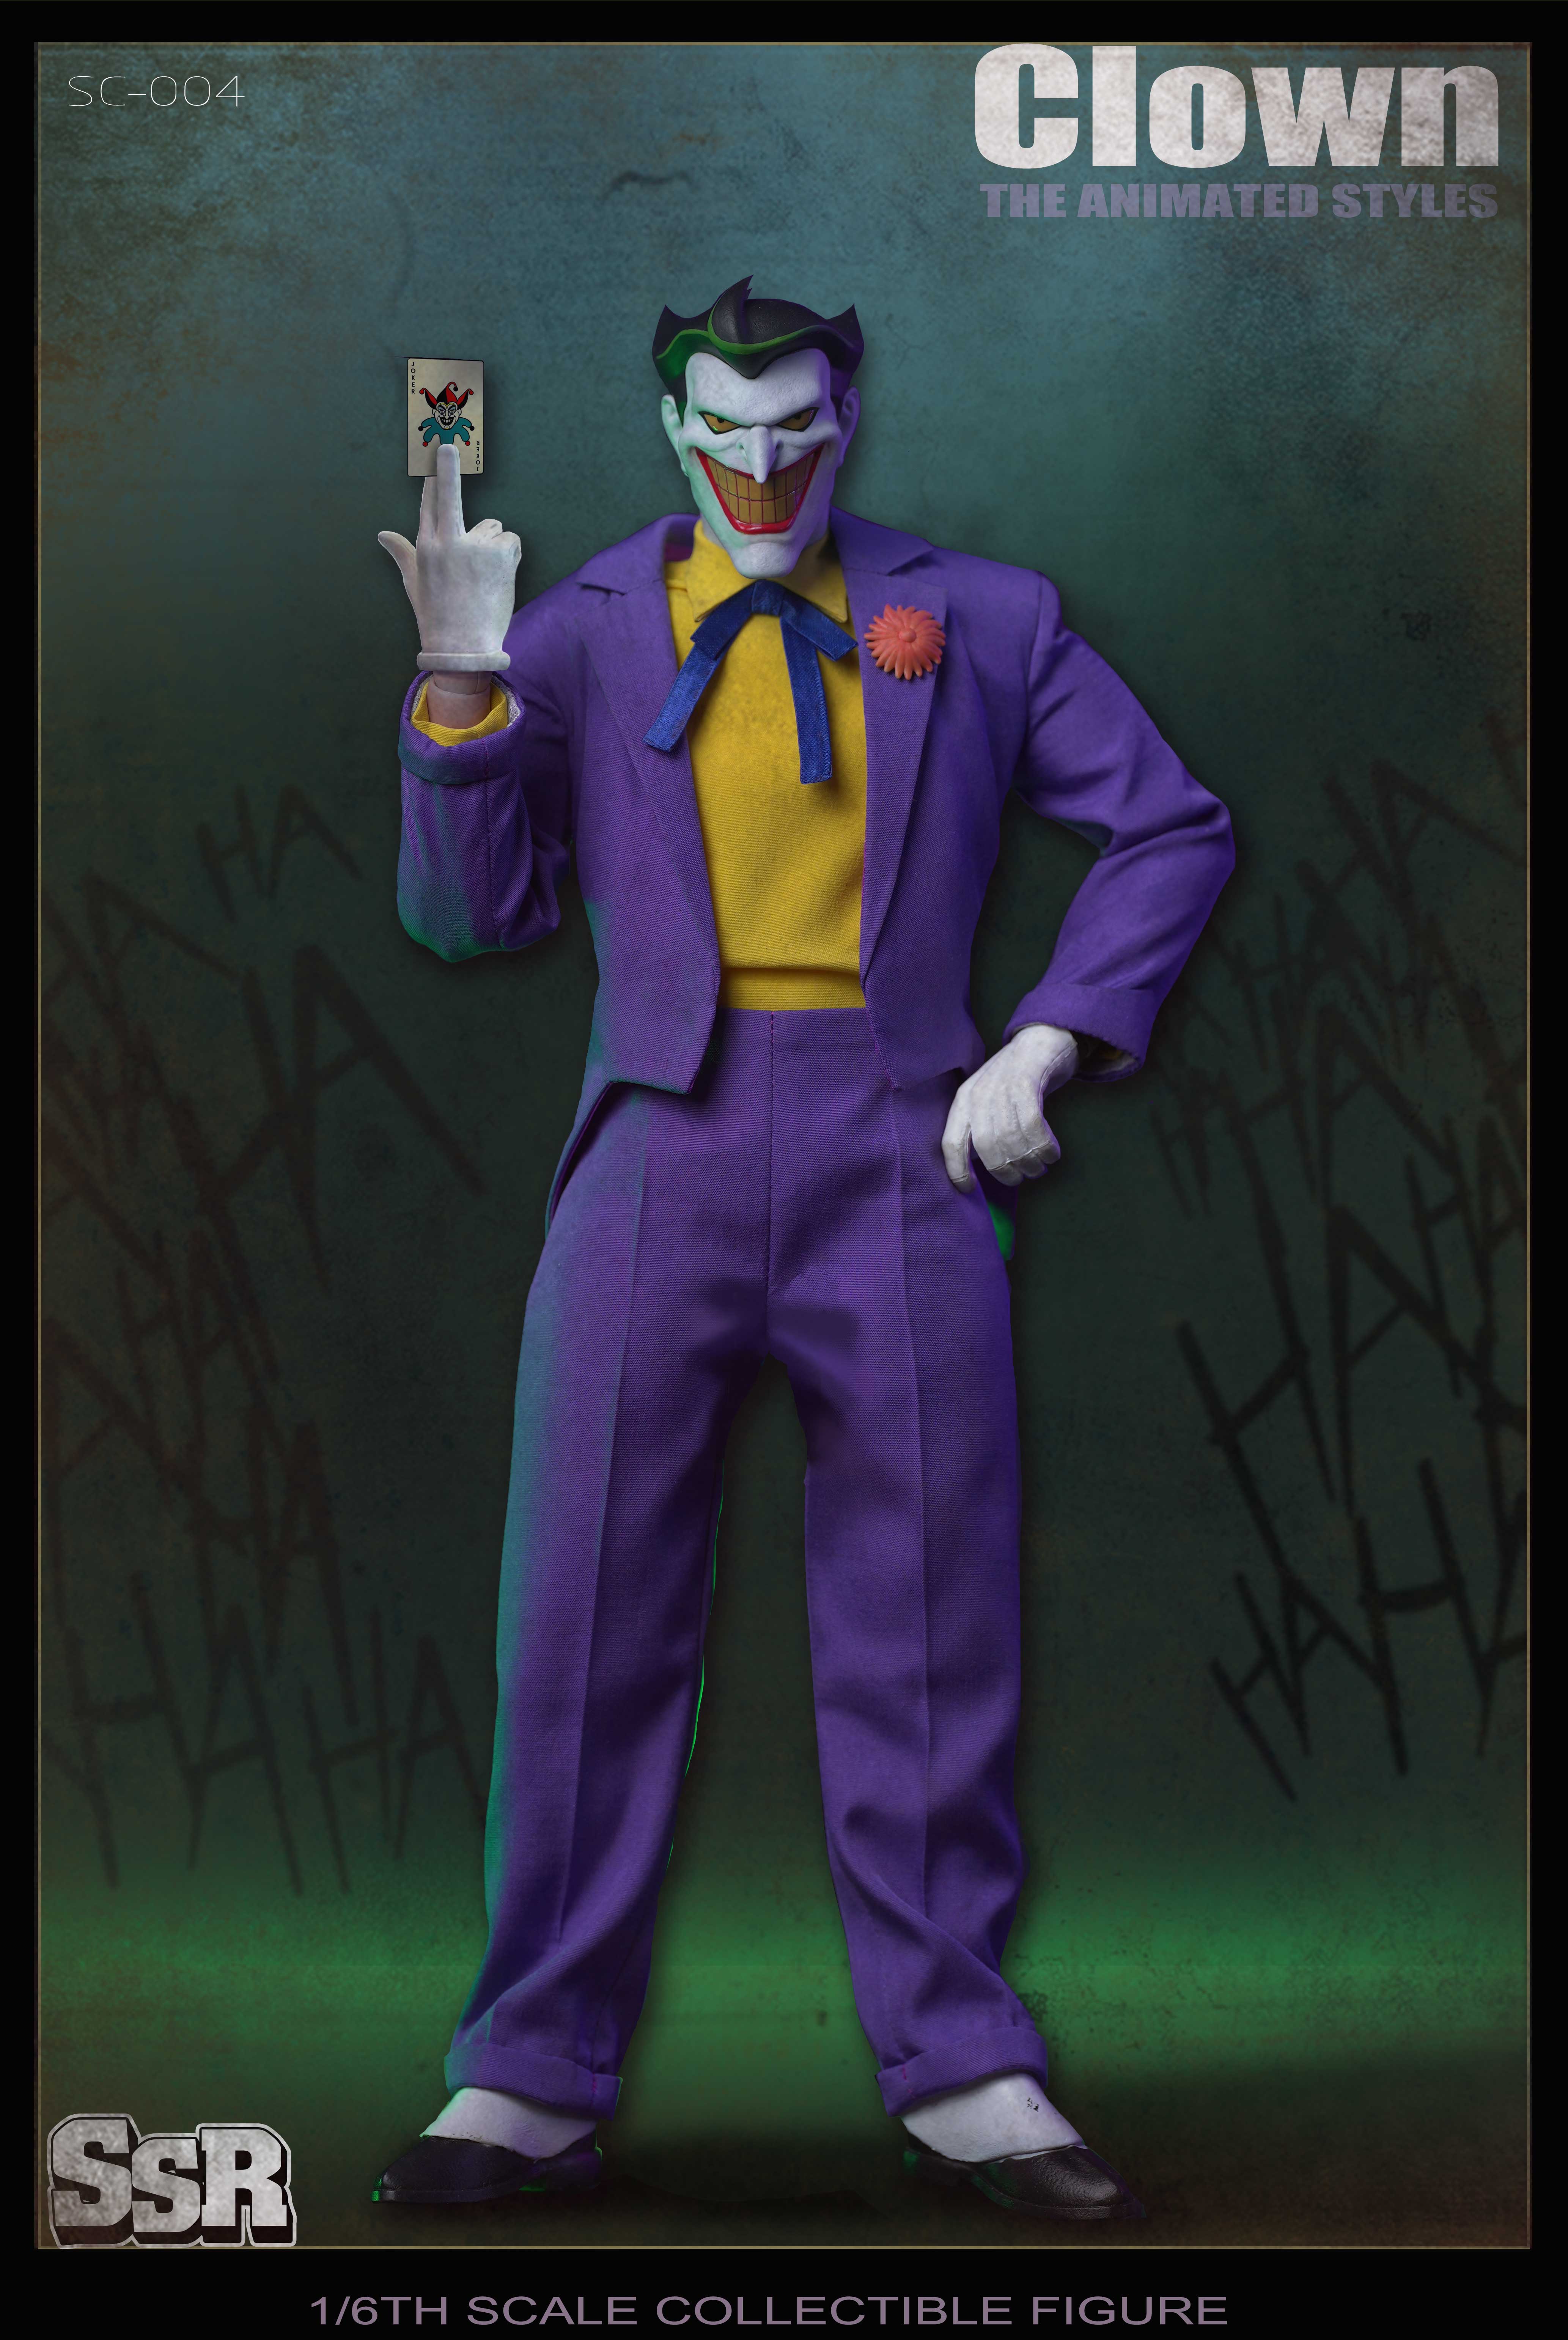 US$ 30.00 - (Pre-order)SSRTOYS THE ANIMATED STYLES CLOWN 1/6 REALISCTIC  FIGURE SSC-004 